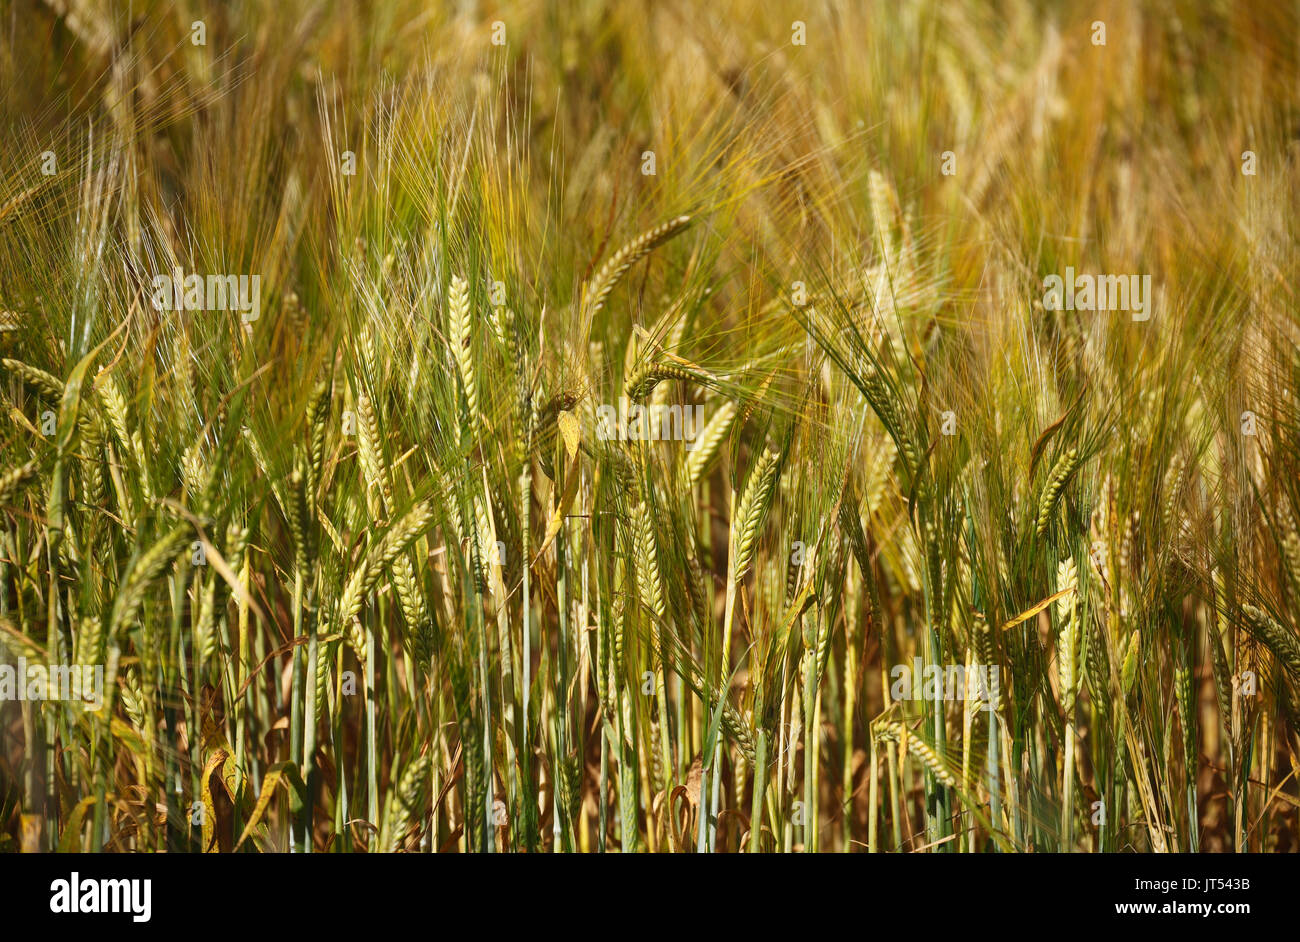 Cereal crop growing in the field. Stock Photo